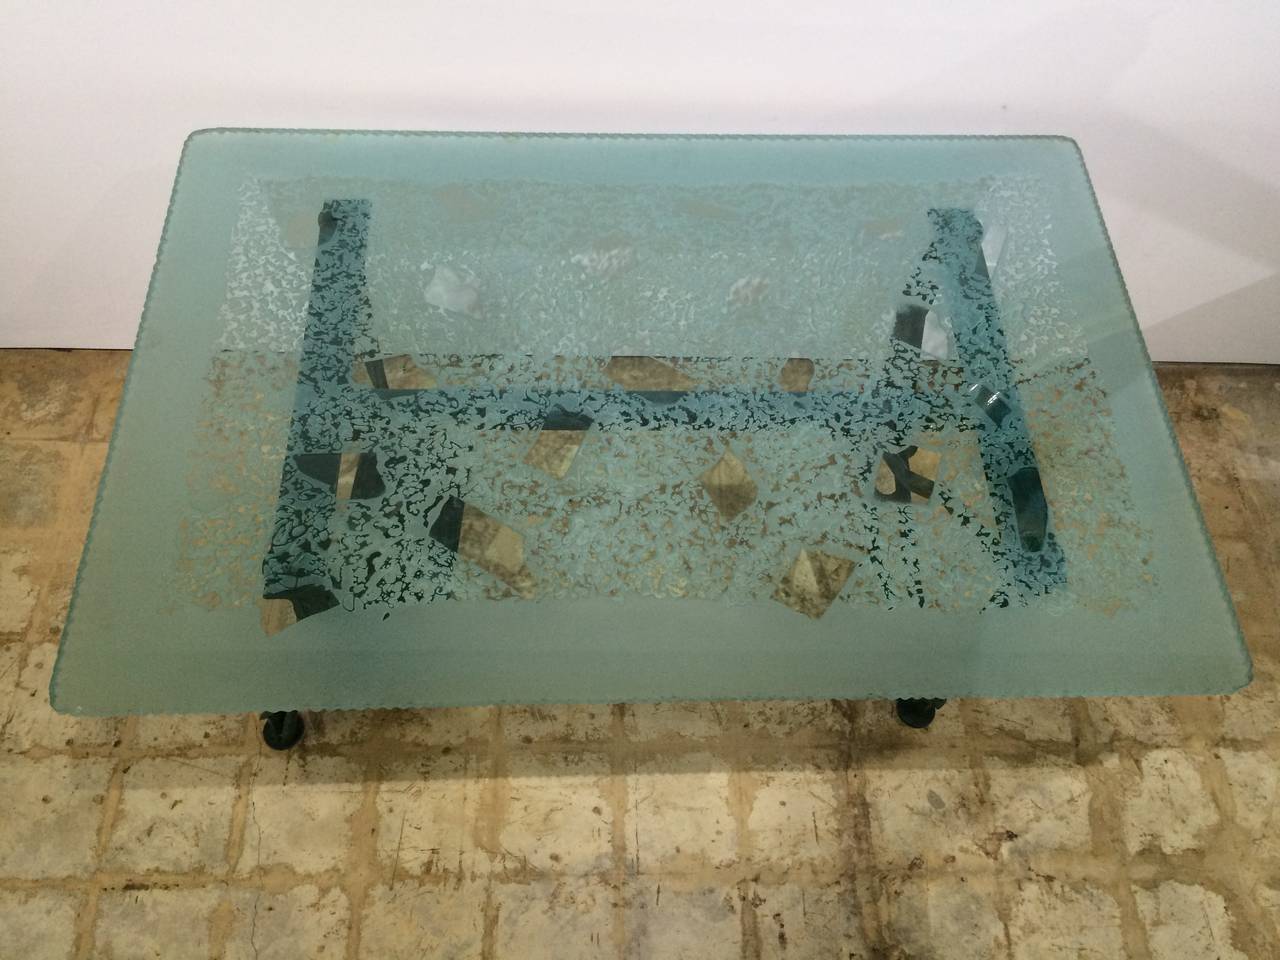 Important sculpted and patinated steel, and sculpted and sandblasted glass desk by Marco de Gueltzl (1958-1992).